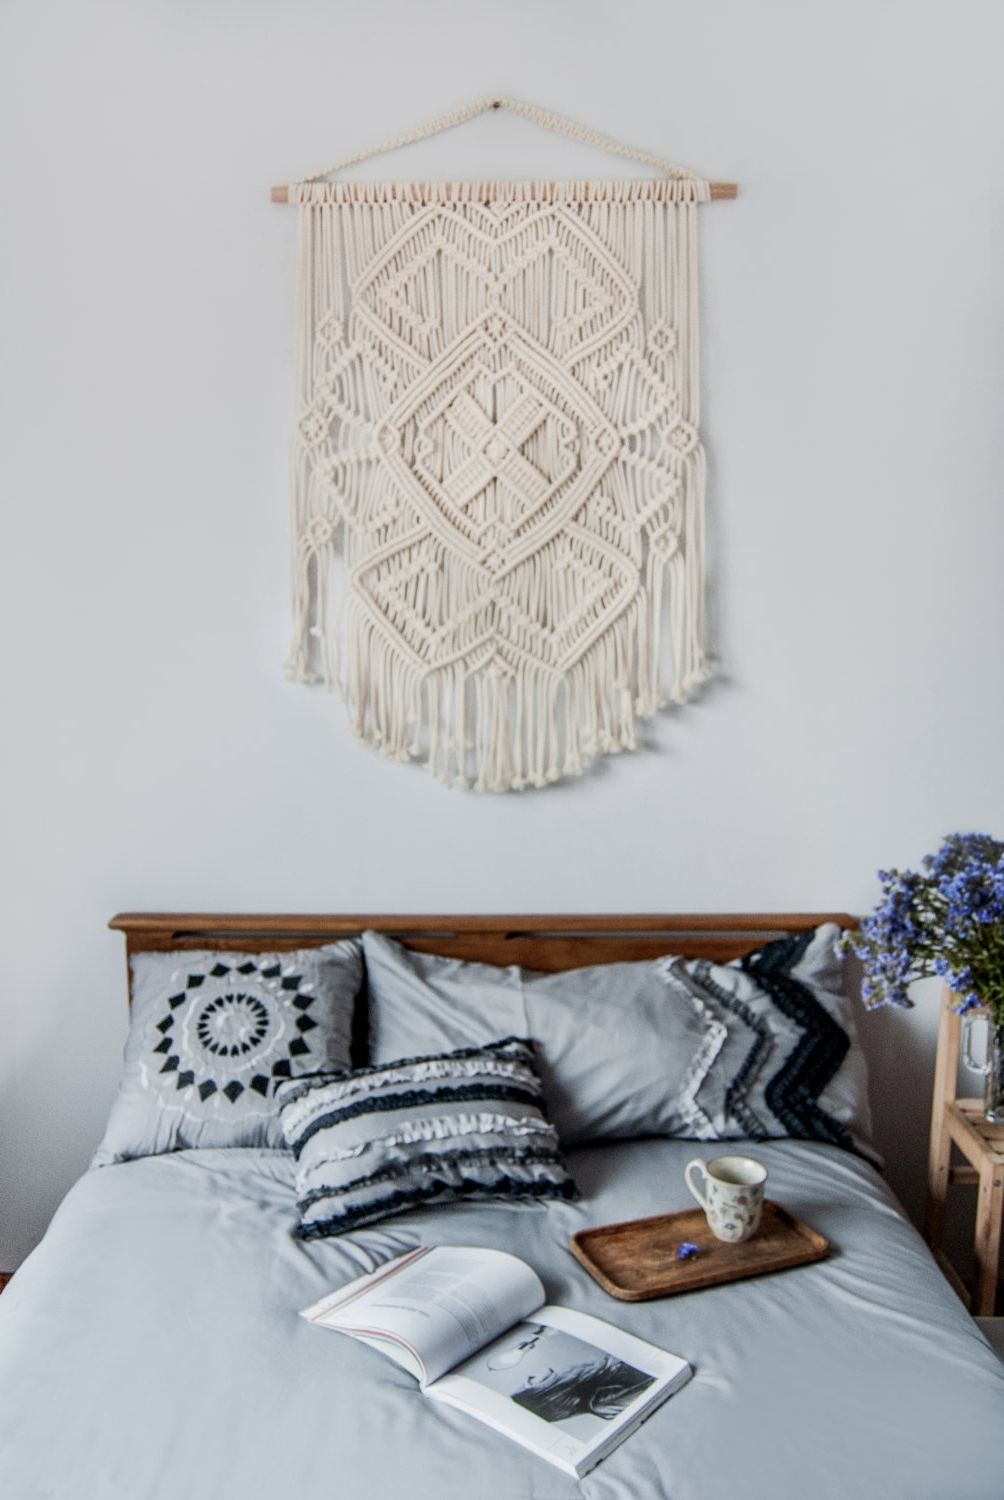 Bedroom Design: Trend Boho Chic Wall Art 87 With Additional Regarding Most Popular Inexpensive Framed Wall Art (View 7 of 15)